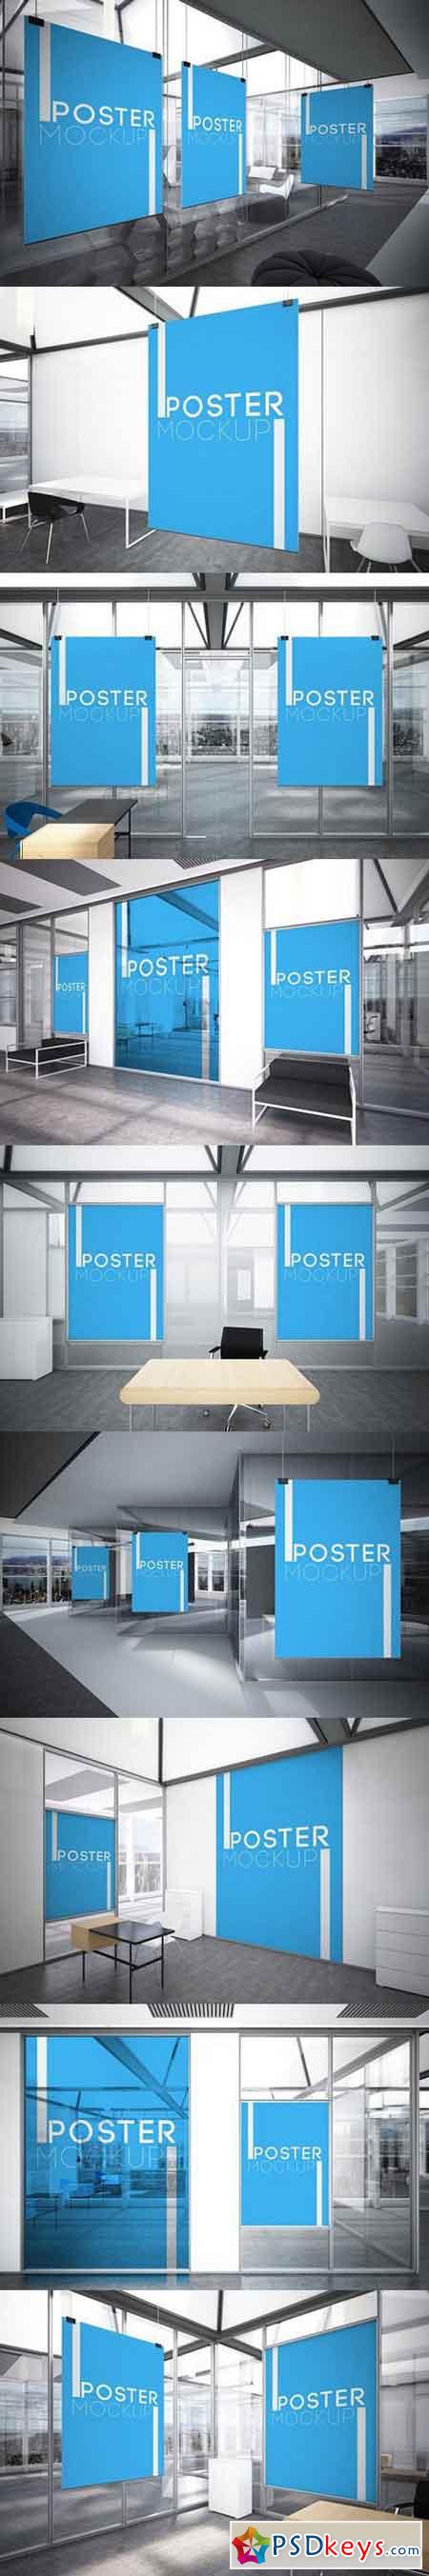 Office Posters Mockups 1437518